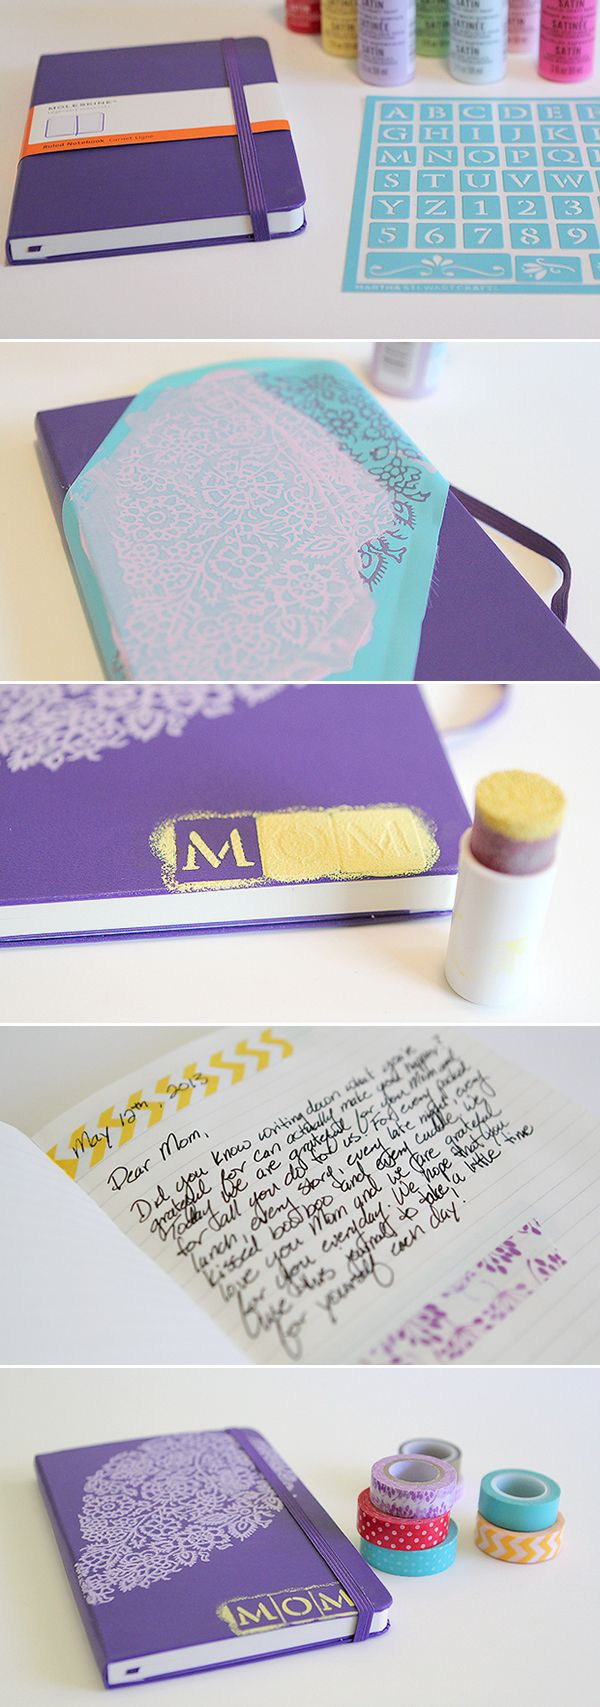 DIY Gratitude Journal. Make a gratitude journal with fine crafty touch and decoration for Mother